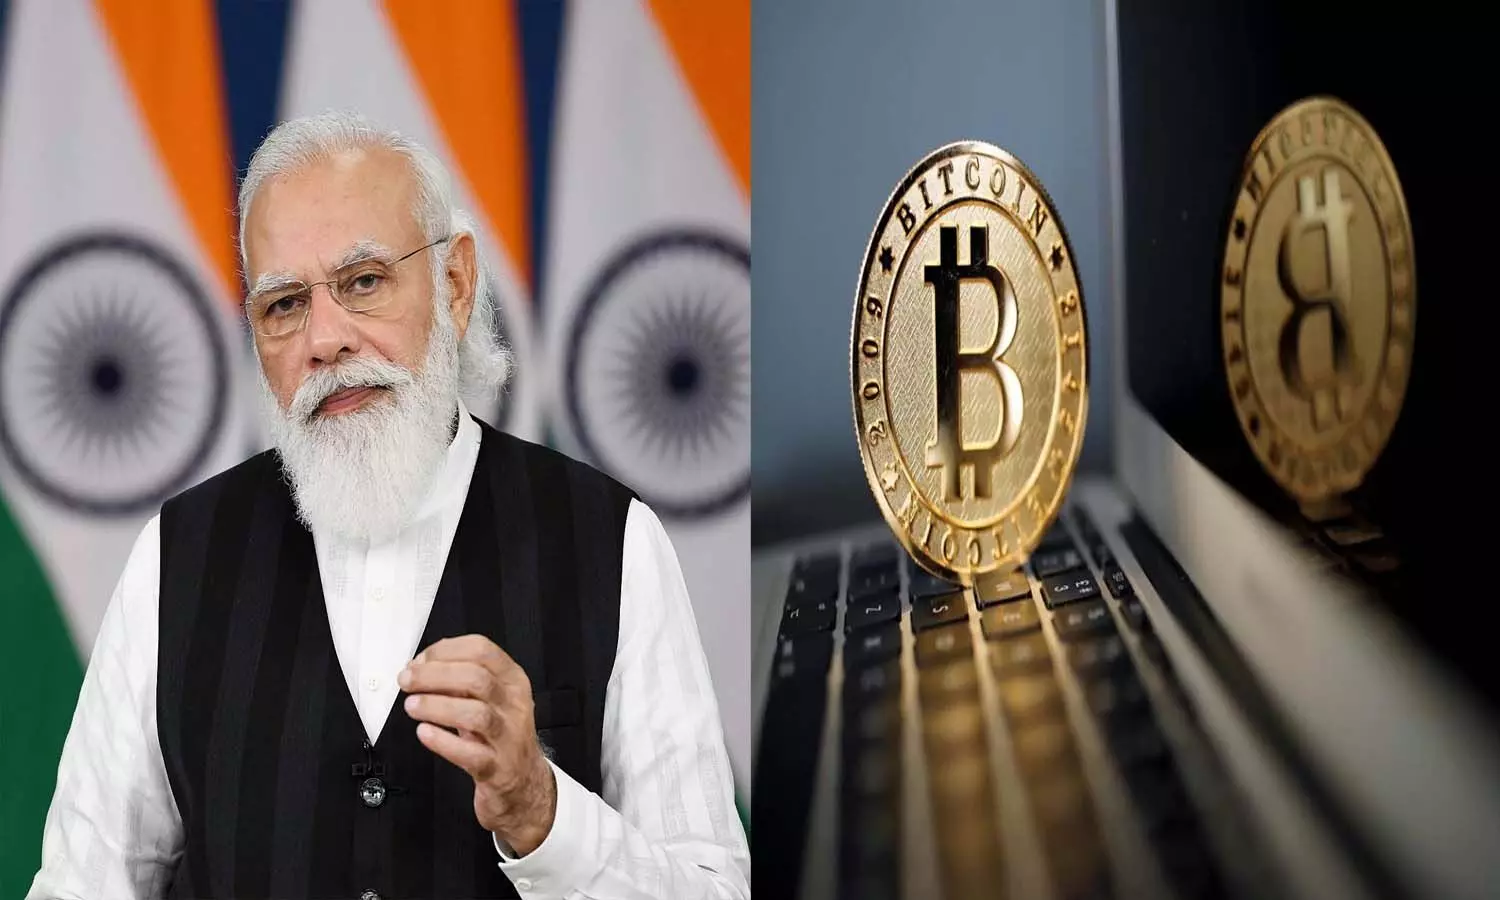 India: Cryptocurrencies expected to be recognized, guidelines will be made